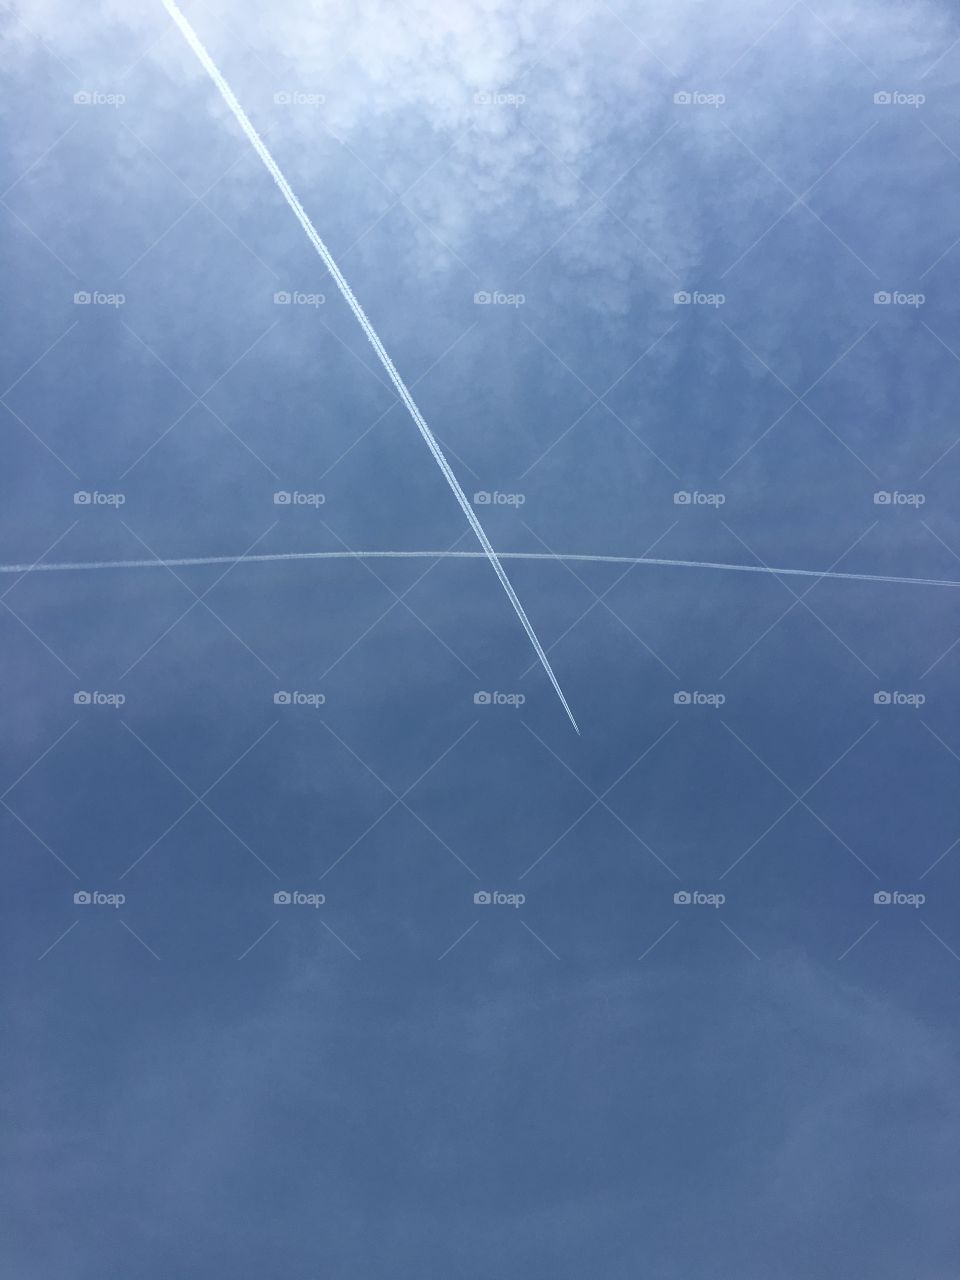 X in the sky; Jet stream of two aircraft crisscrossing each other in the sky 